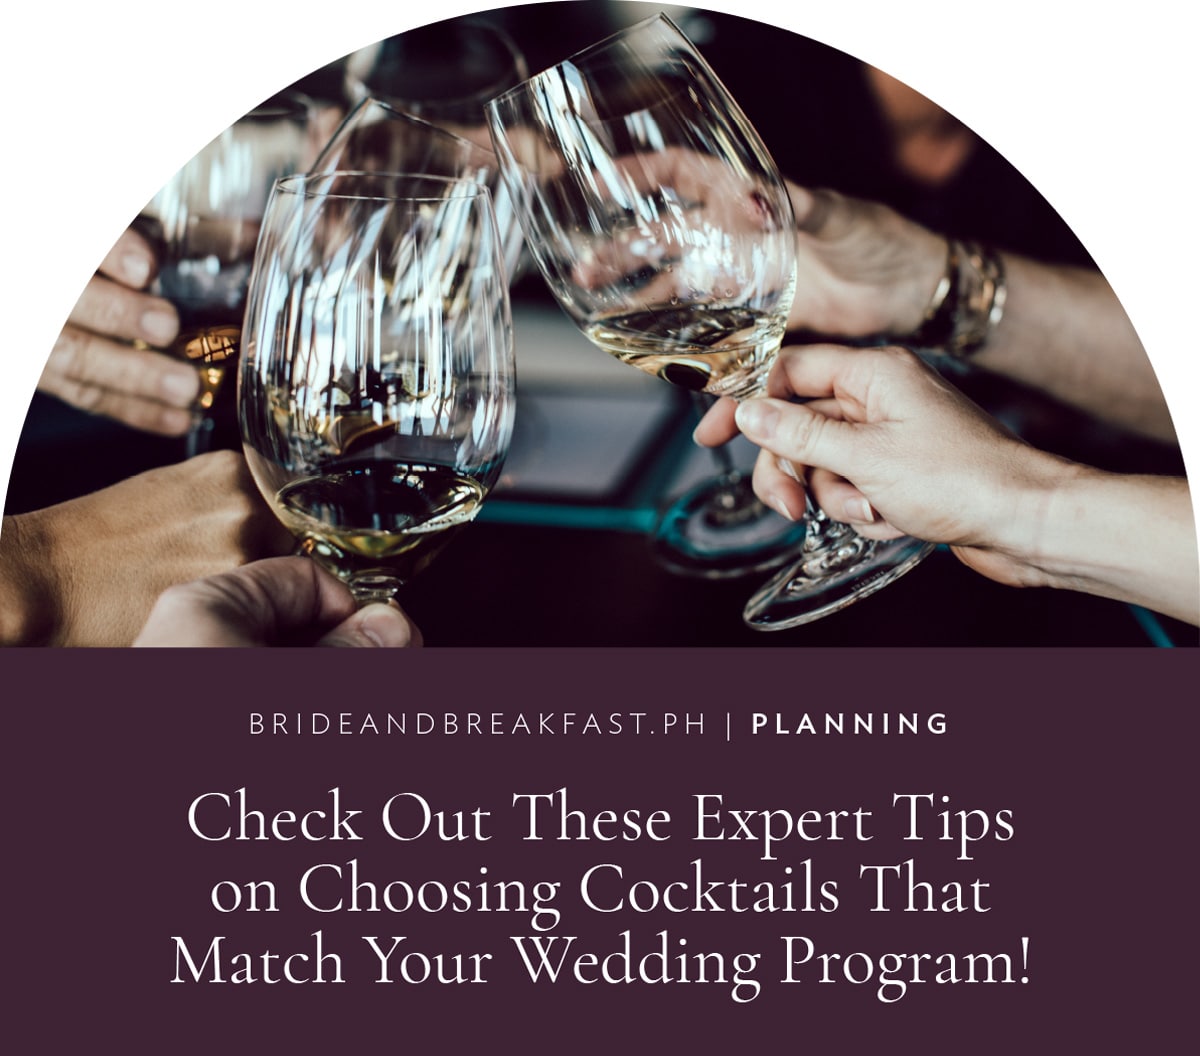 Check Out These Expert Tips on Choosing Cocktails That Match Your Wedding Program!